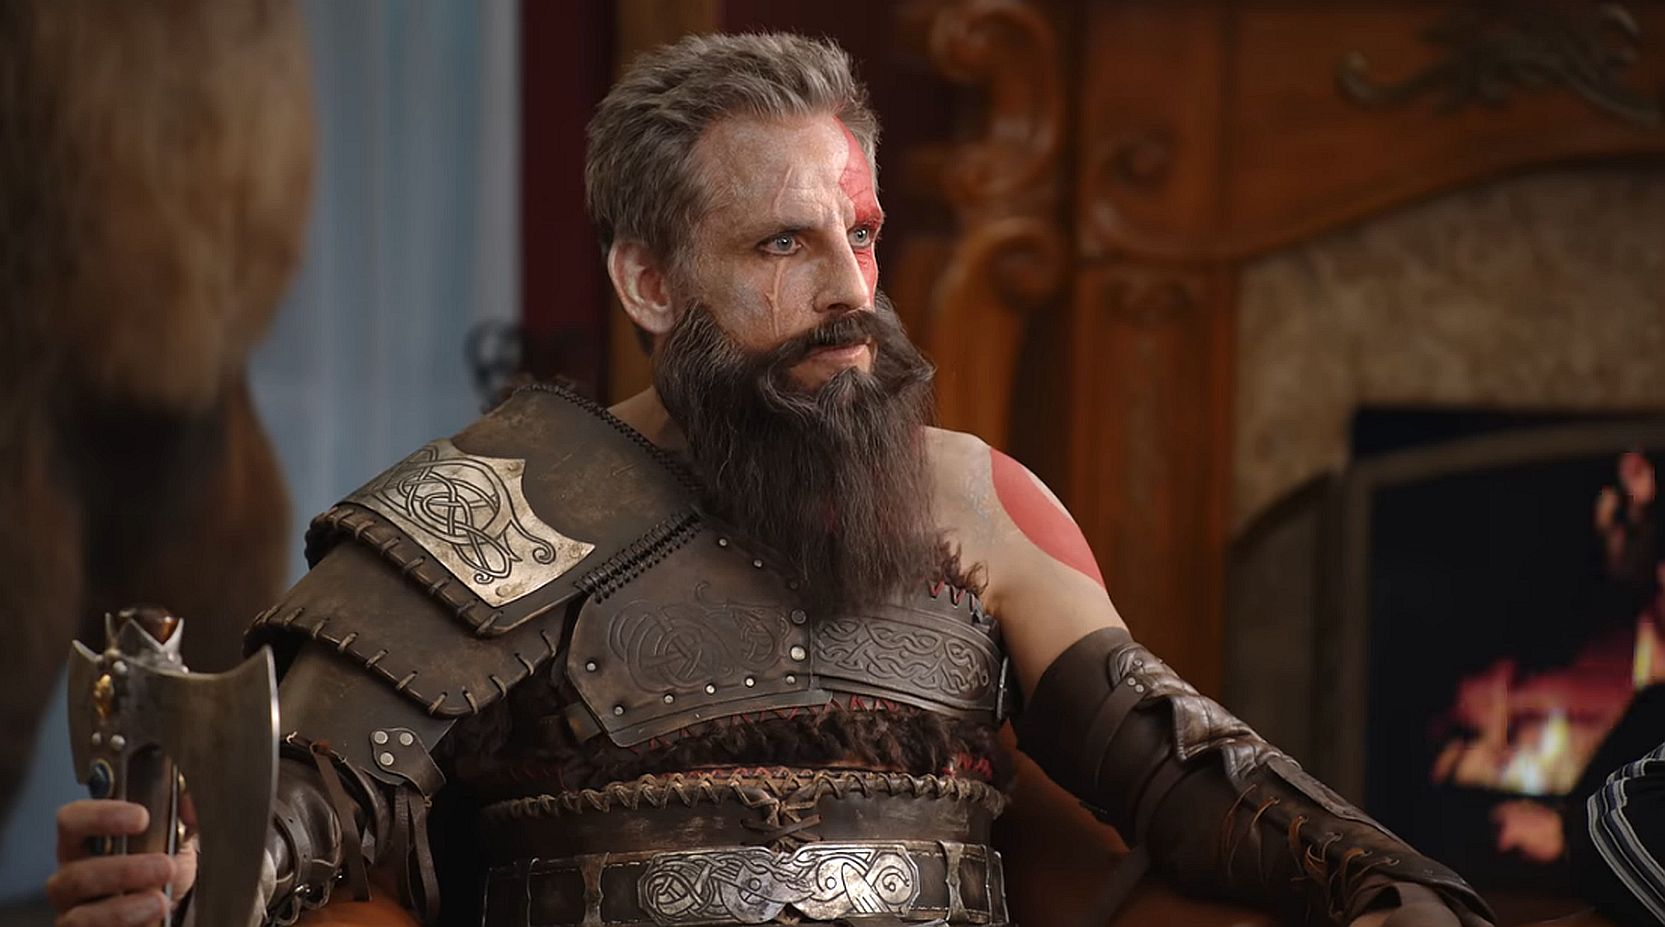 God of War sells over 23 million copies while sequel Ragnarok gets an interesting commercial